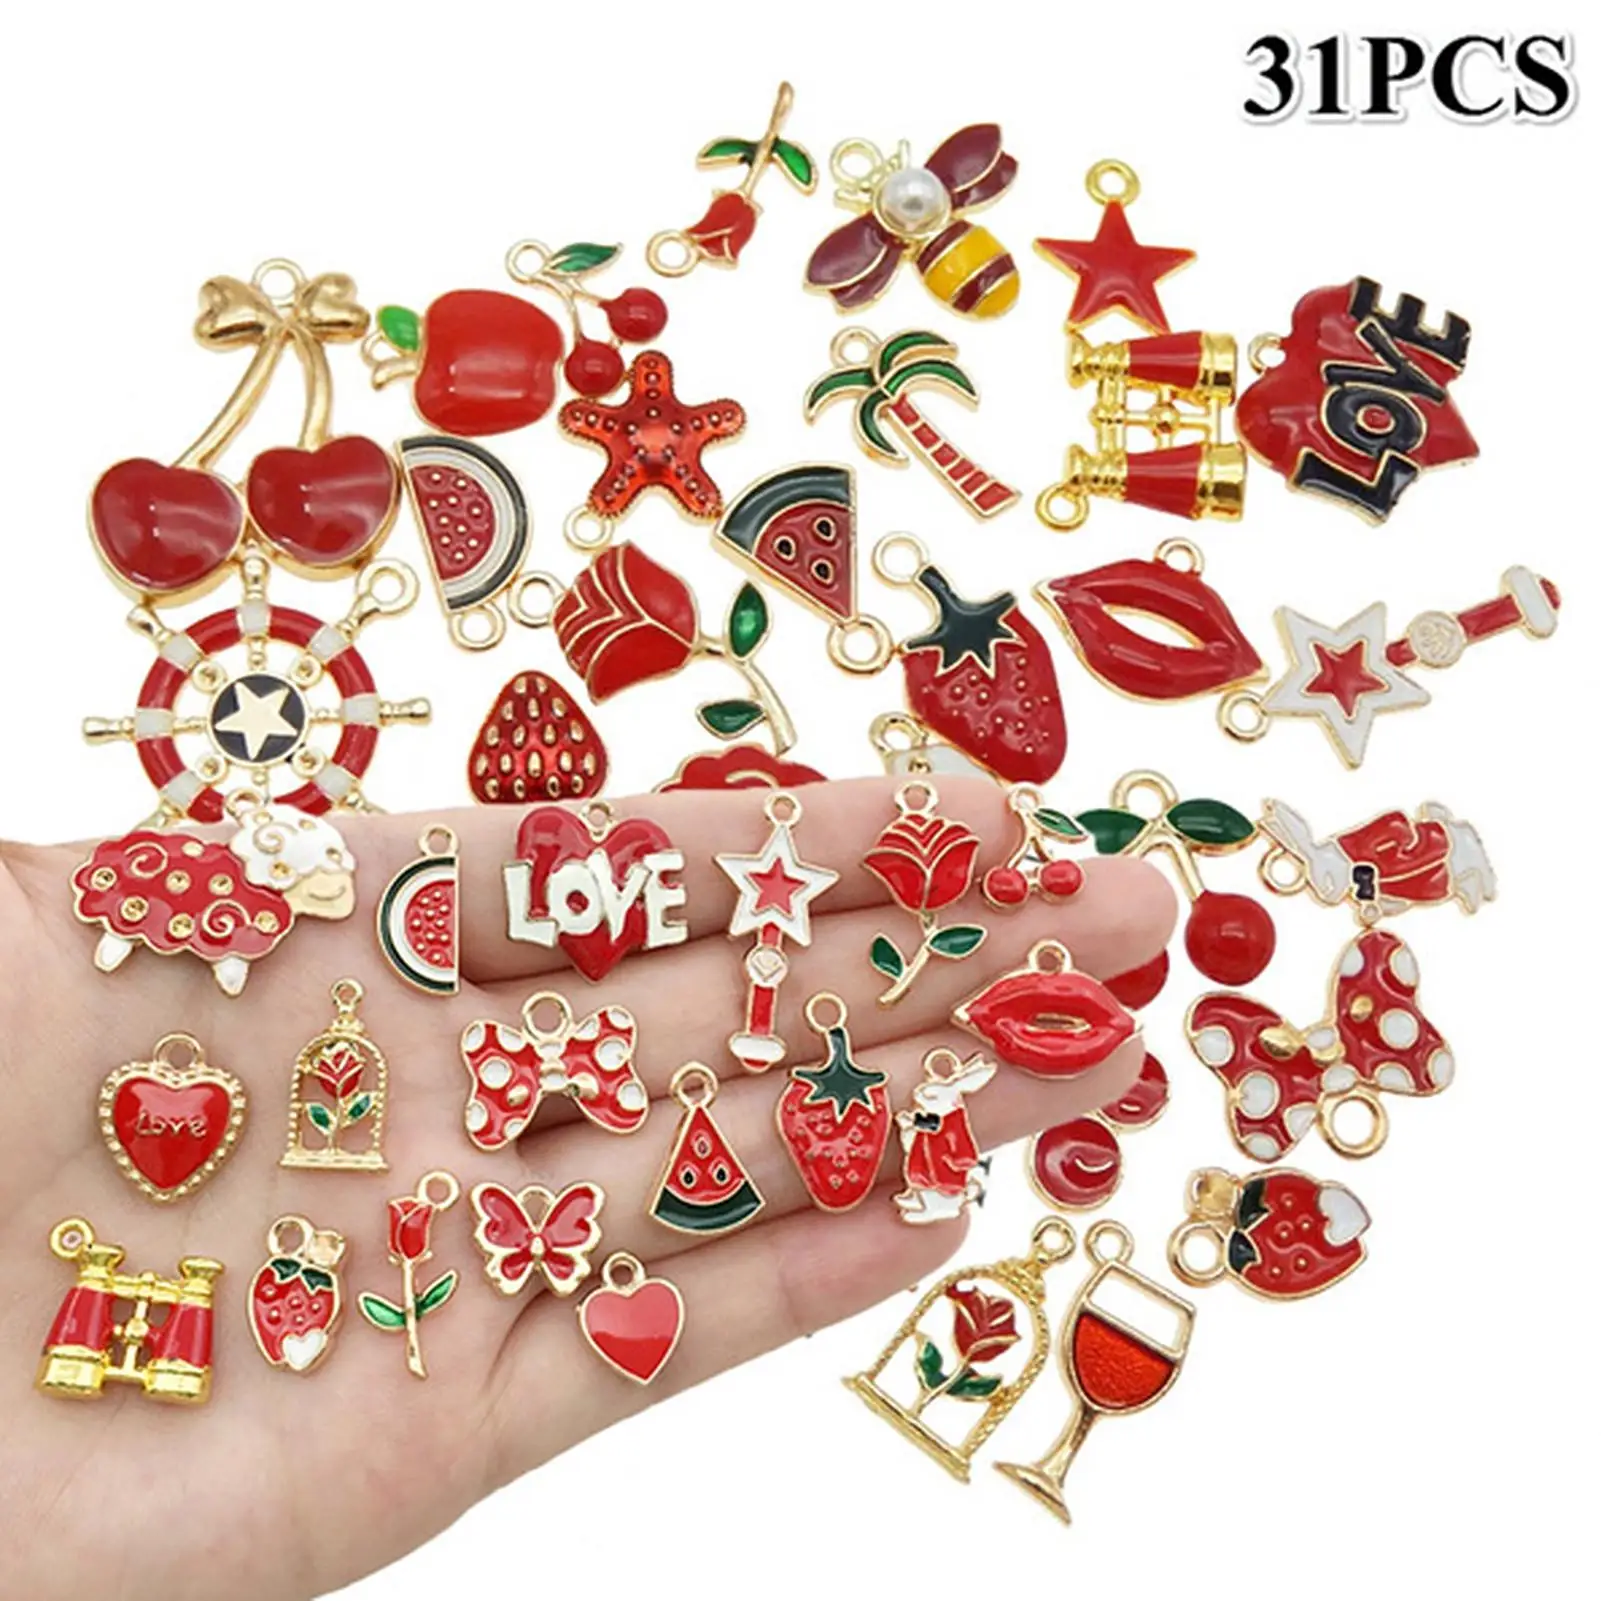 

31pcs Assorted Plated Enamel Animal Star Love Random Charms Pendants for DIY Necklace Bracelet Jewelry Making Accessories